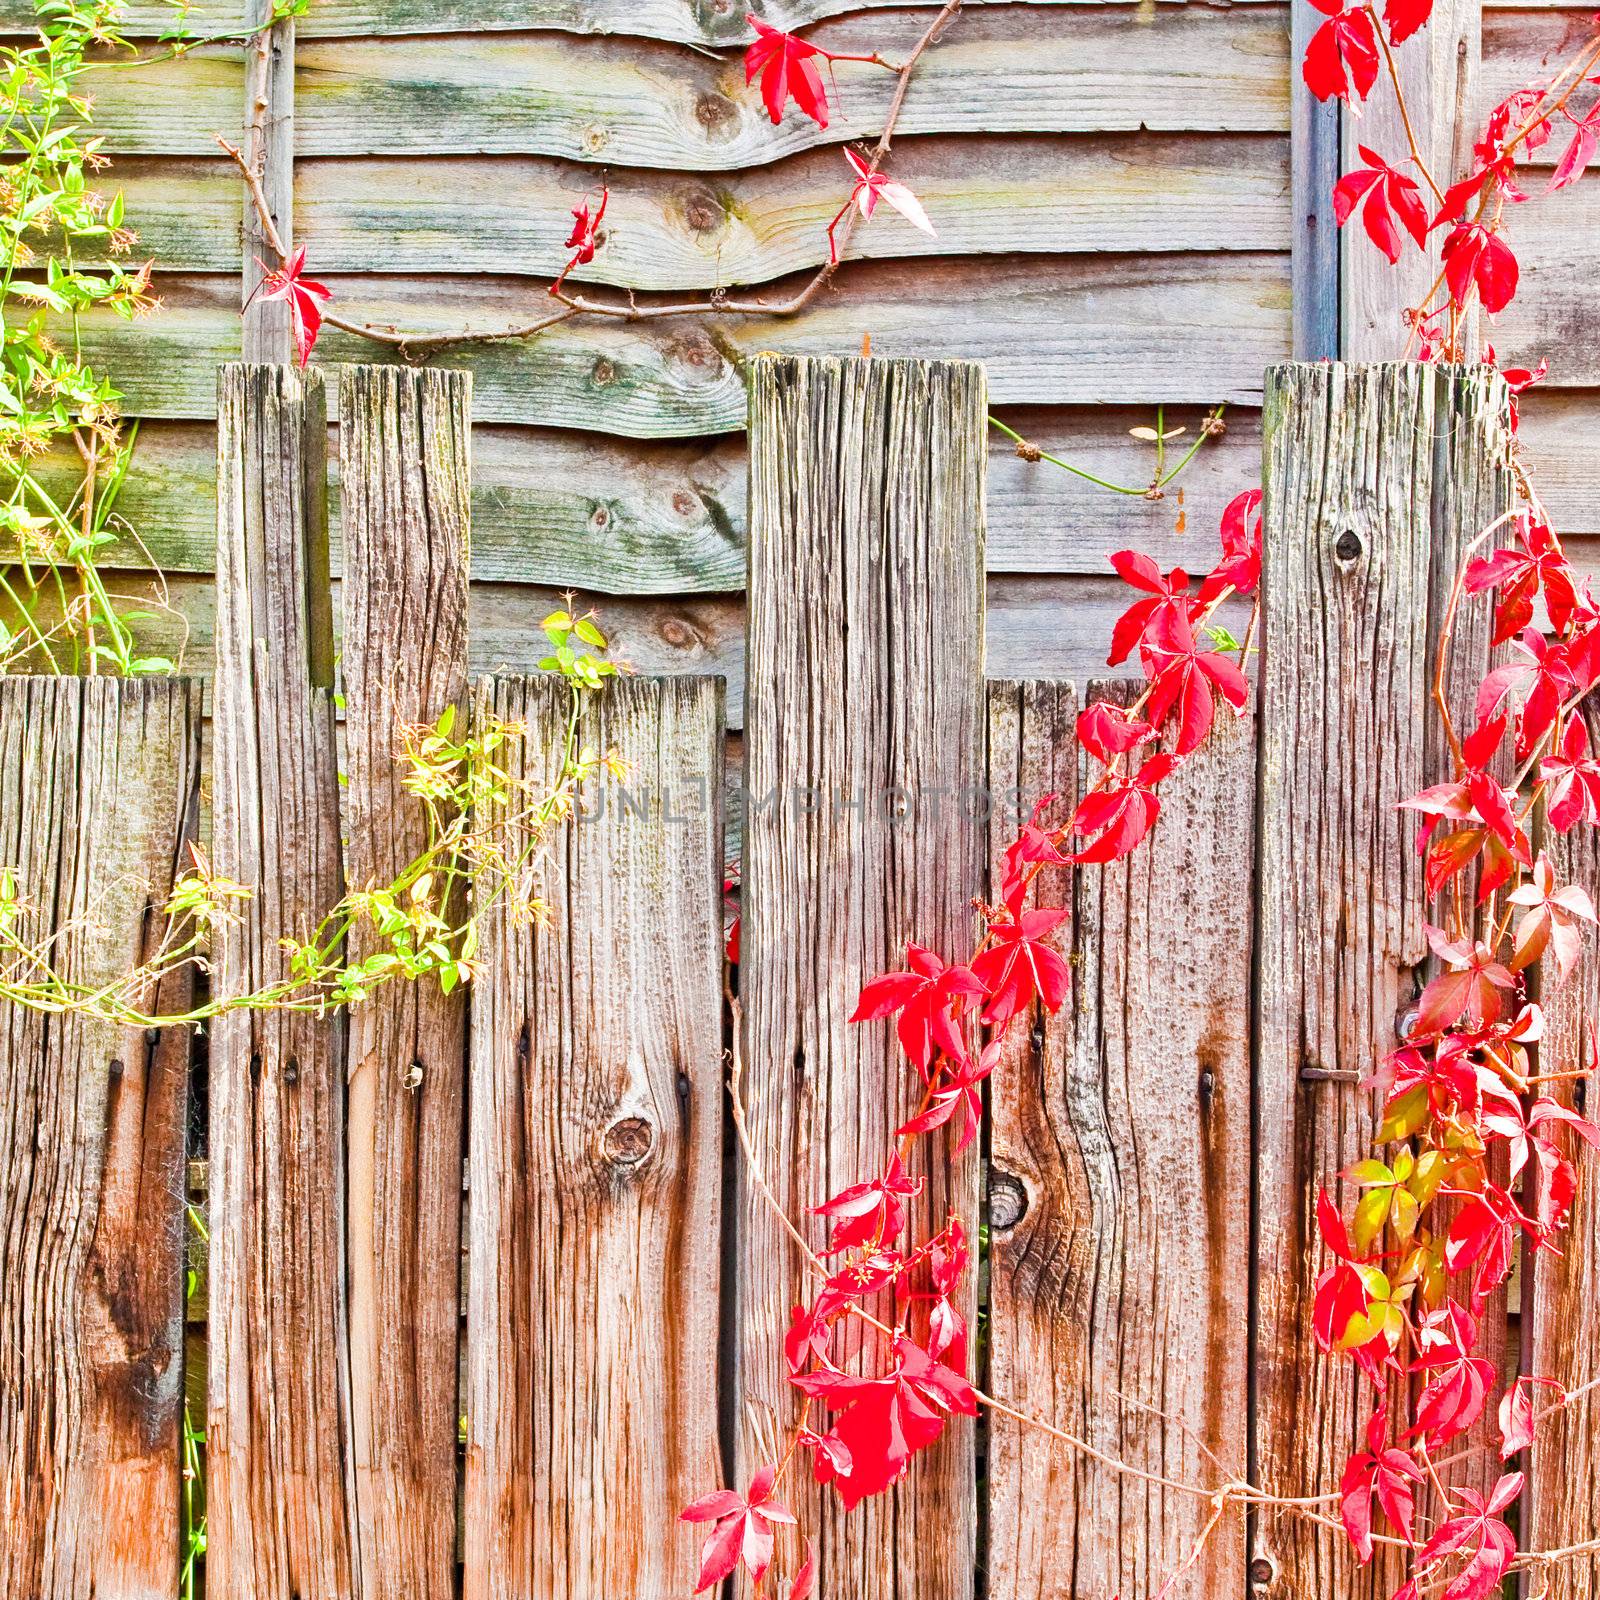 Nice detailed backgroun d image of a fence with red and green ivy